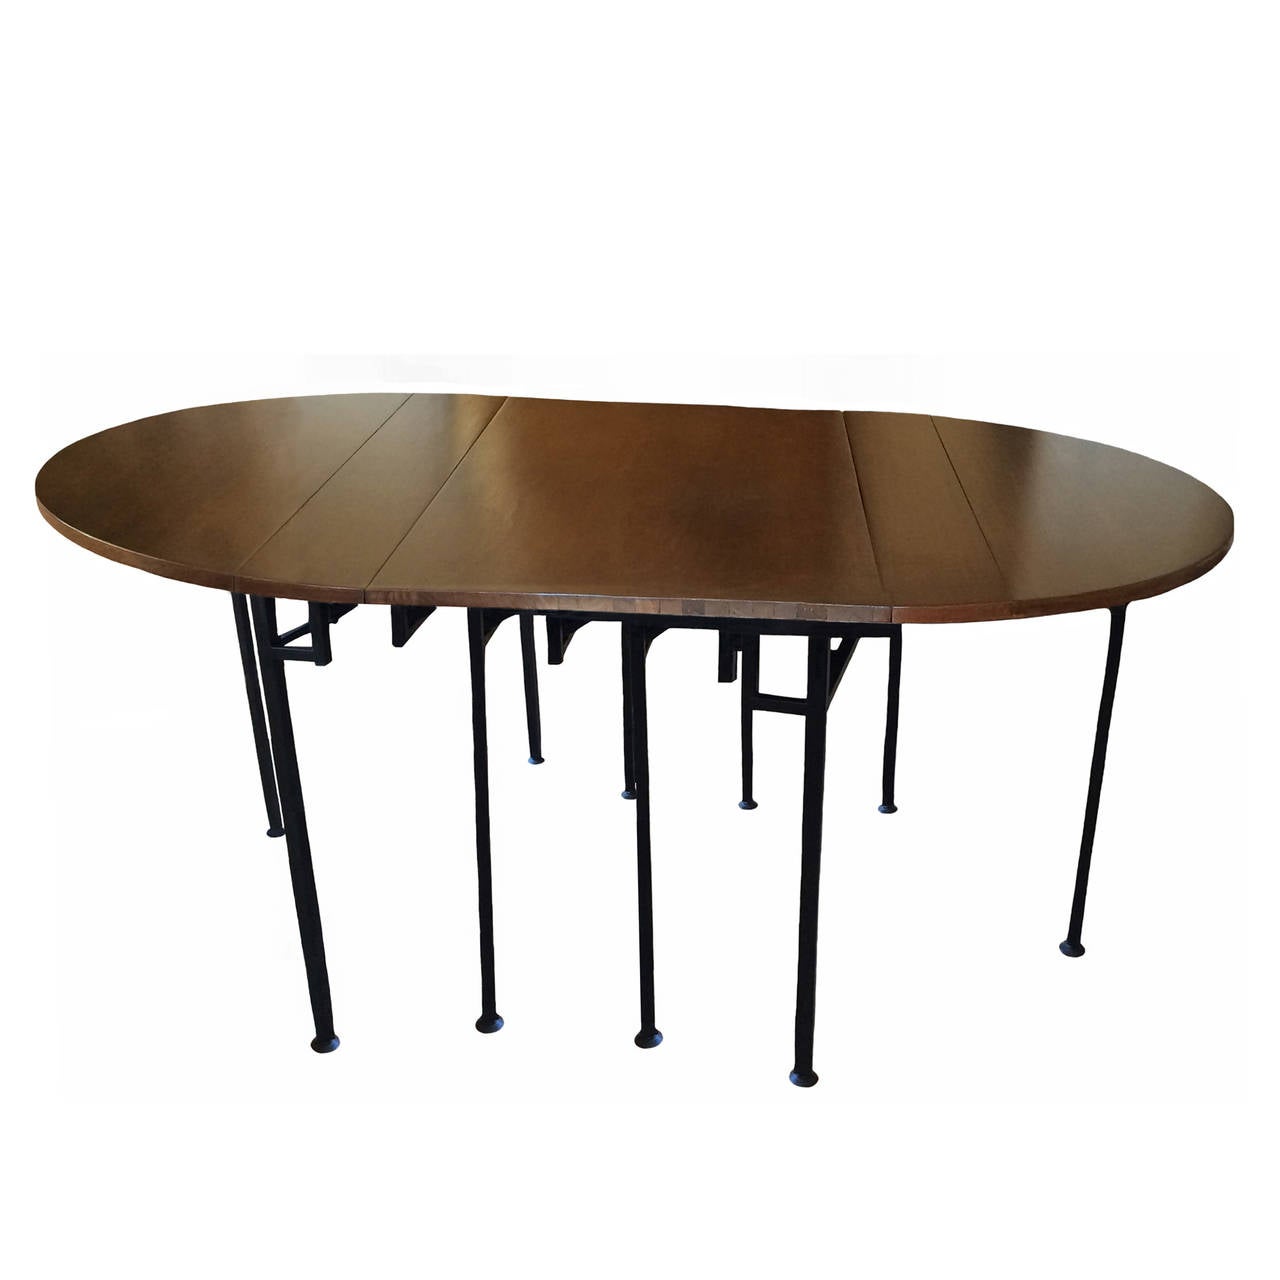 A French mahogany oval extension table by Torrens et Fils in the style of Jansen with four leaves; black steel accordion base, stamped, circa 1950. The table measures 135.5 inches fully extended.
Each leaf is approximately 24 inches wide overall.